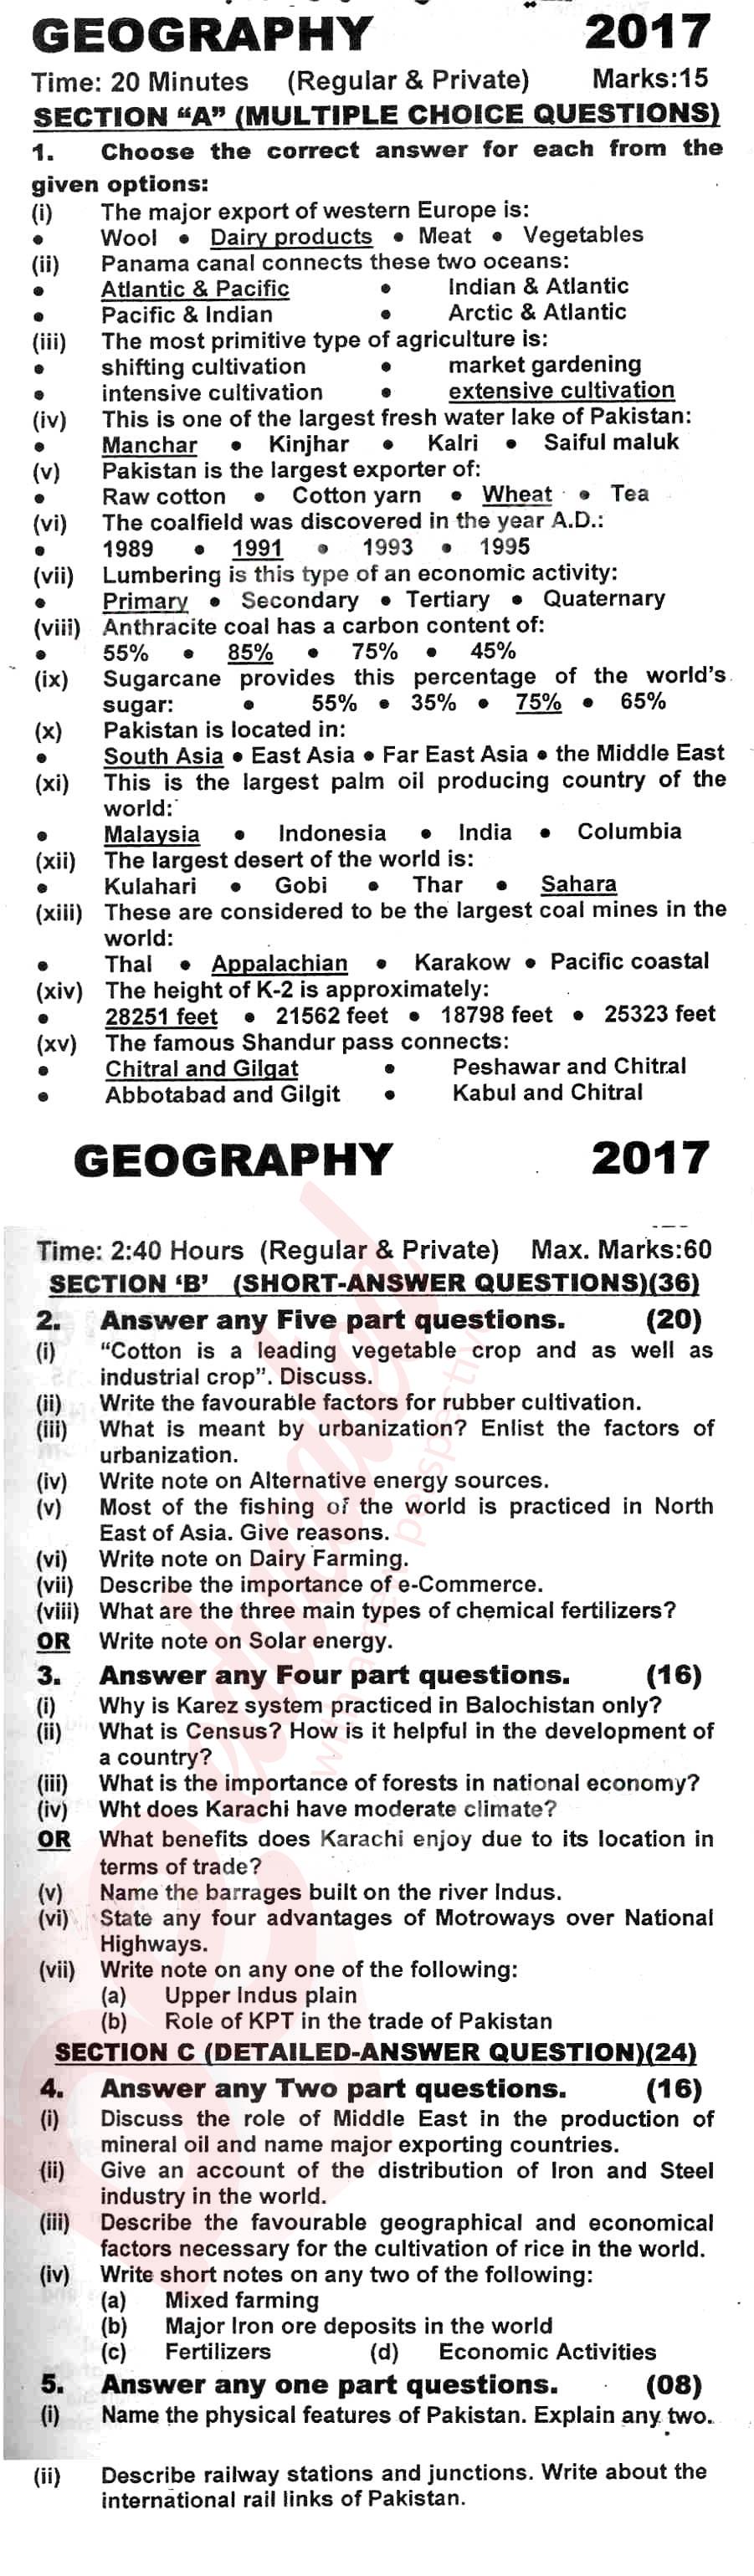 Commercial Geography FA Part 2 Past Paper Group 1 KPBTE 2017